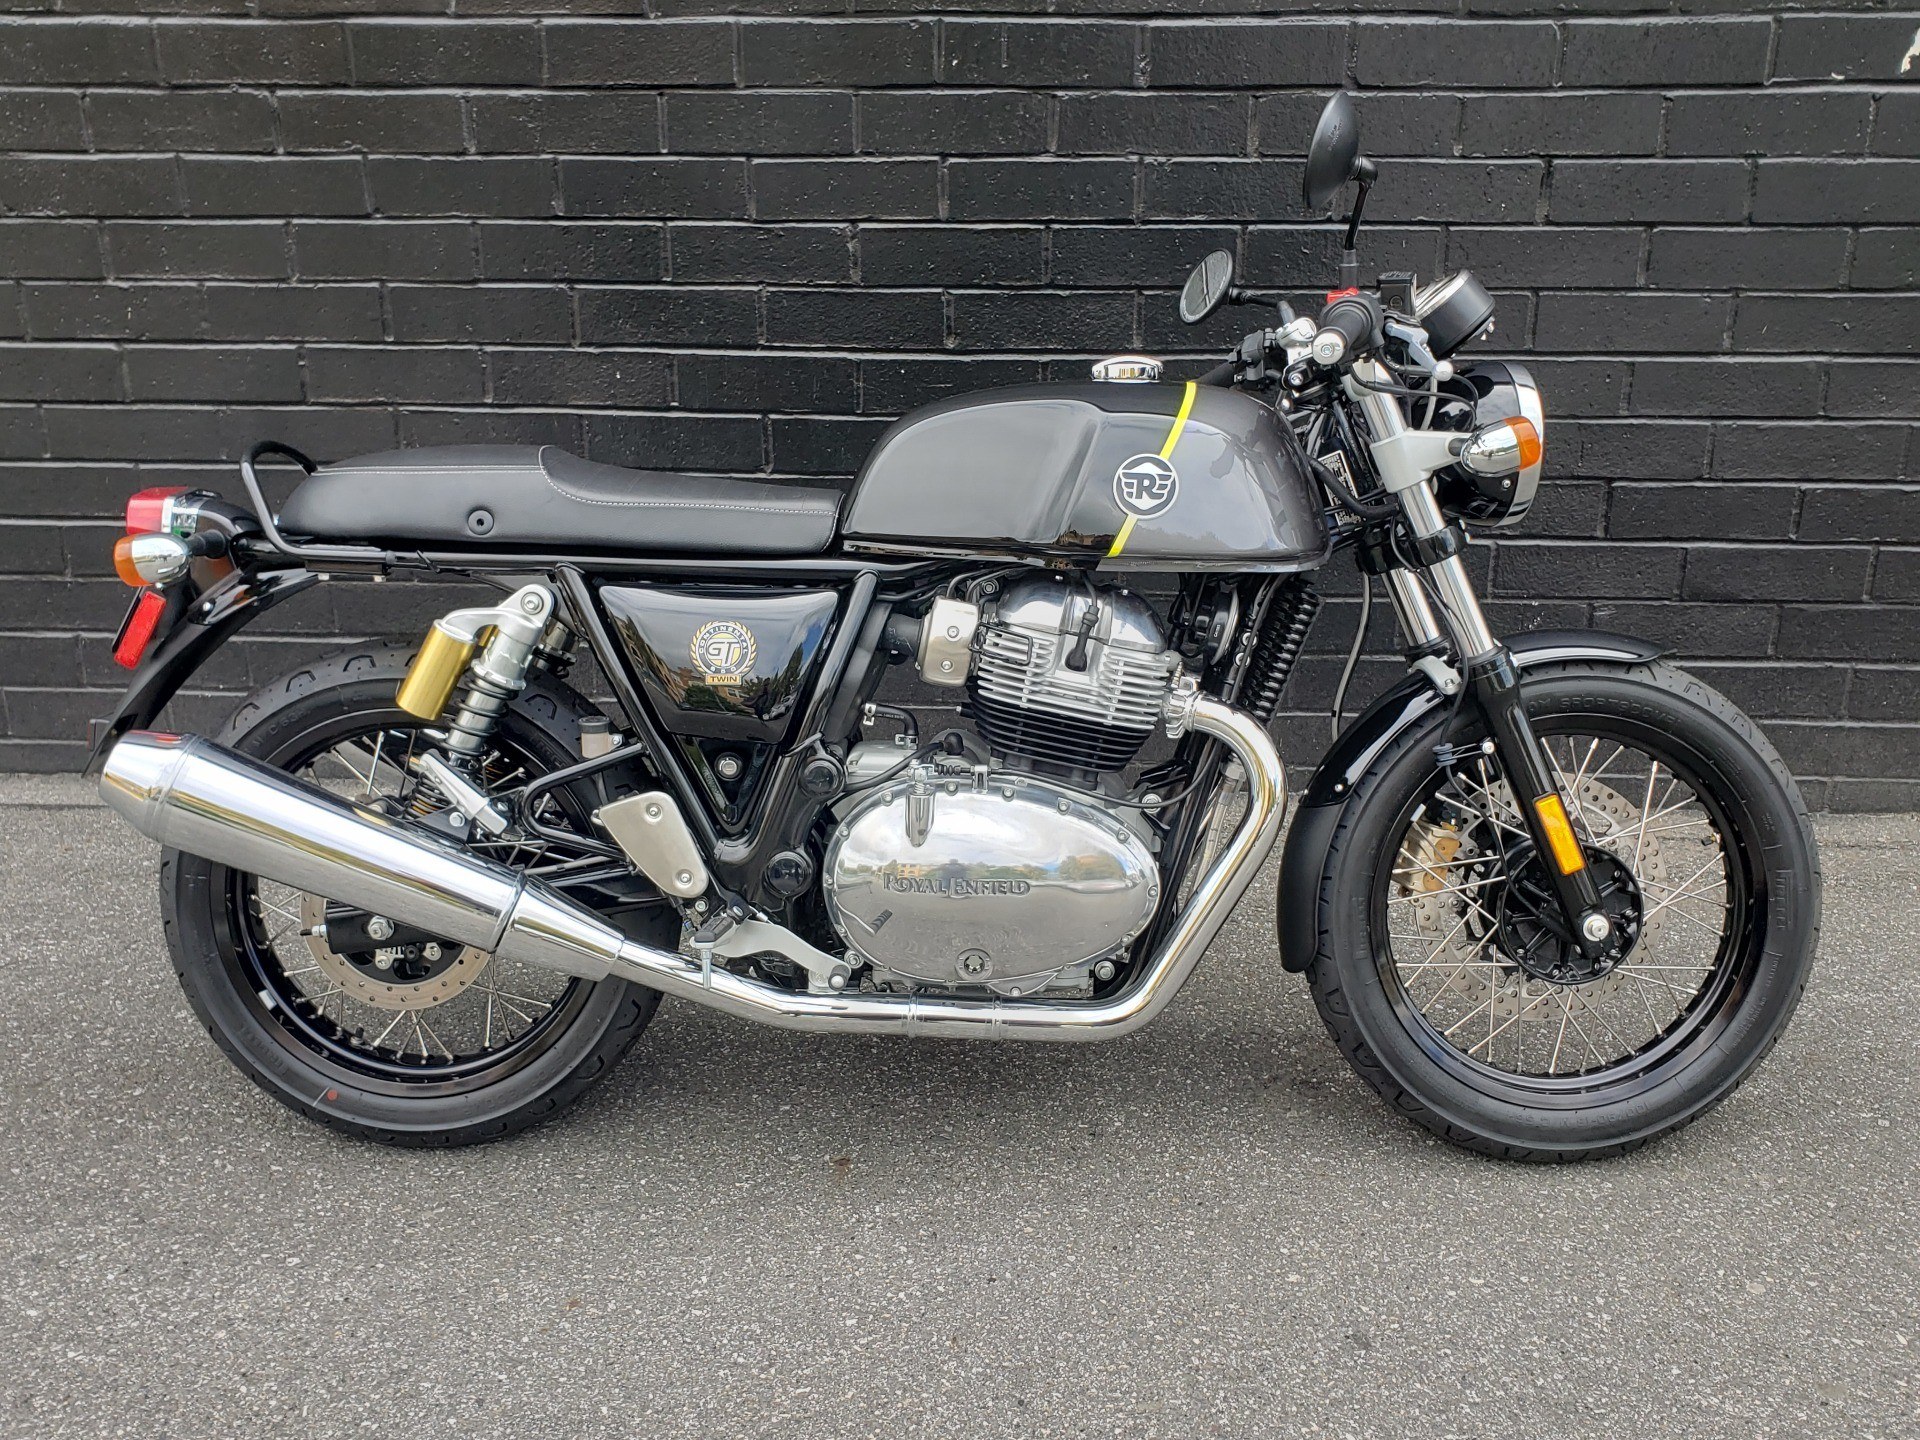 New 2021 Royal Enfield Continental GT 650 Motorcycles in ...